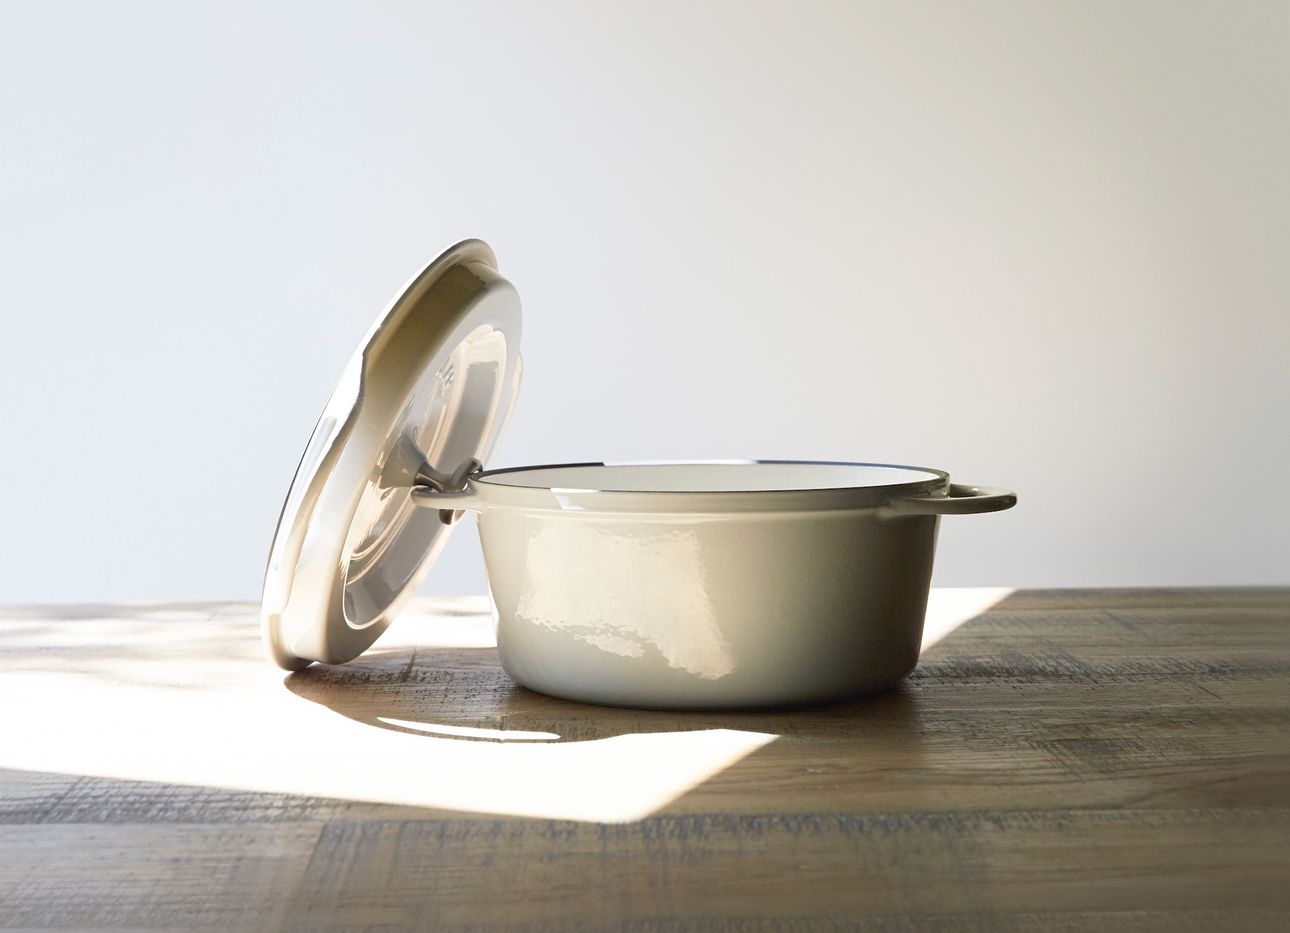 These Lightweight Cast-Iron Pots and Pans Bring an Age-Old Craft